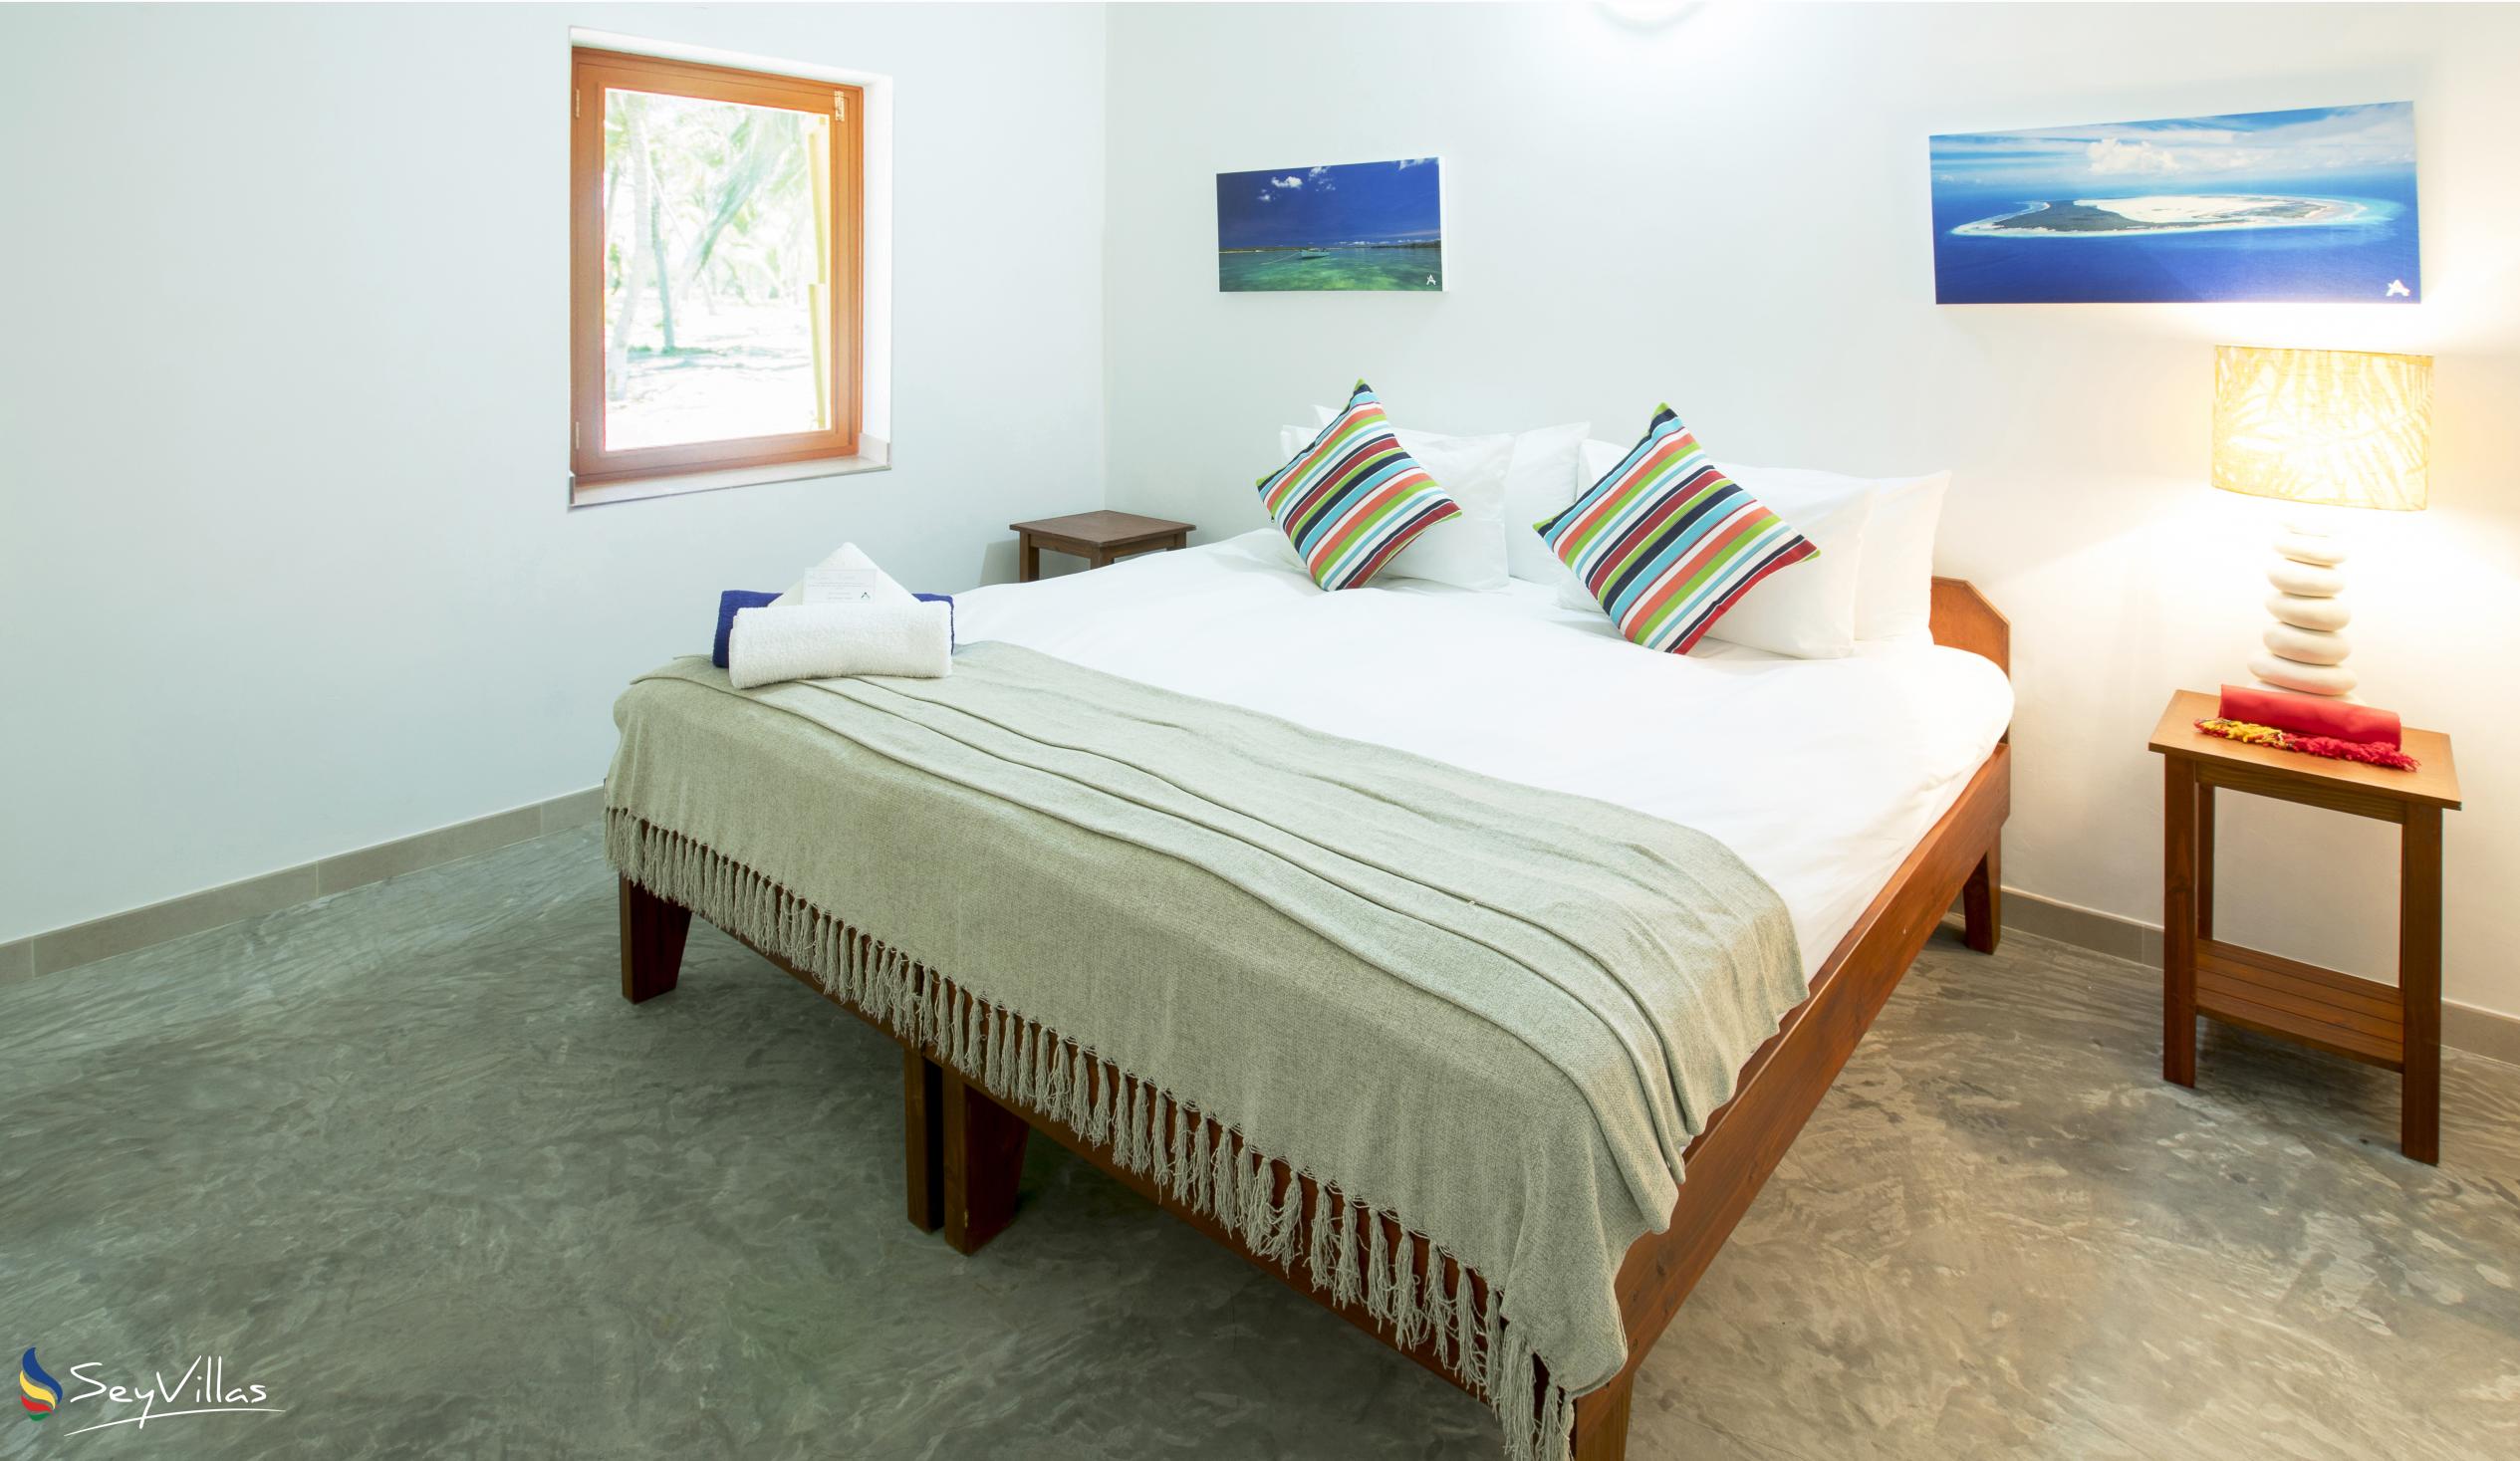 Photo 20: Astove Coral House - Double Room Fishing Package - Astove Island (Seychelles)